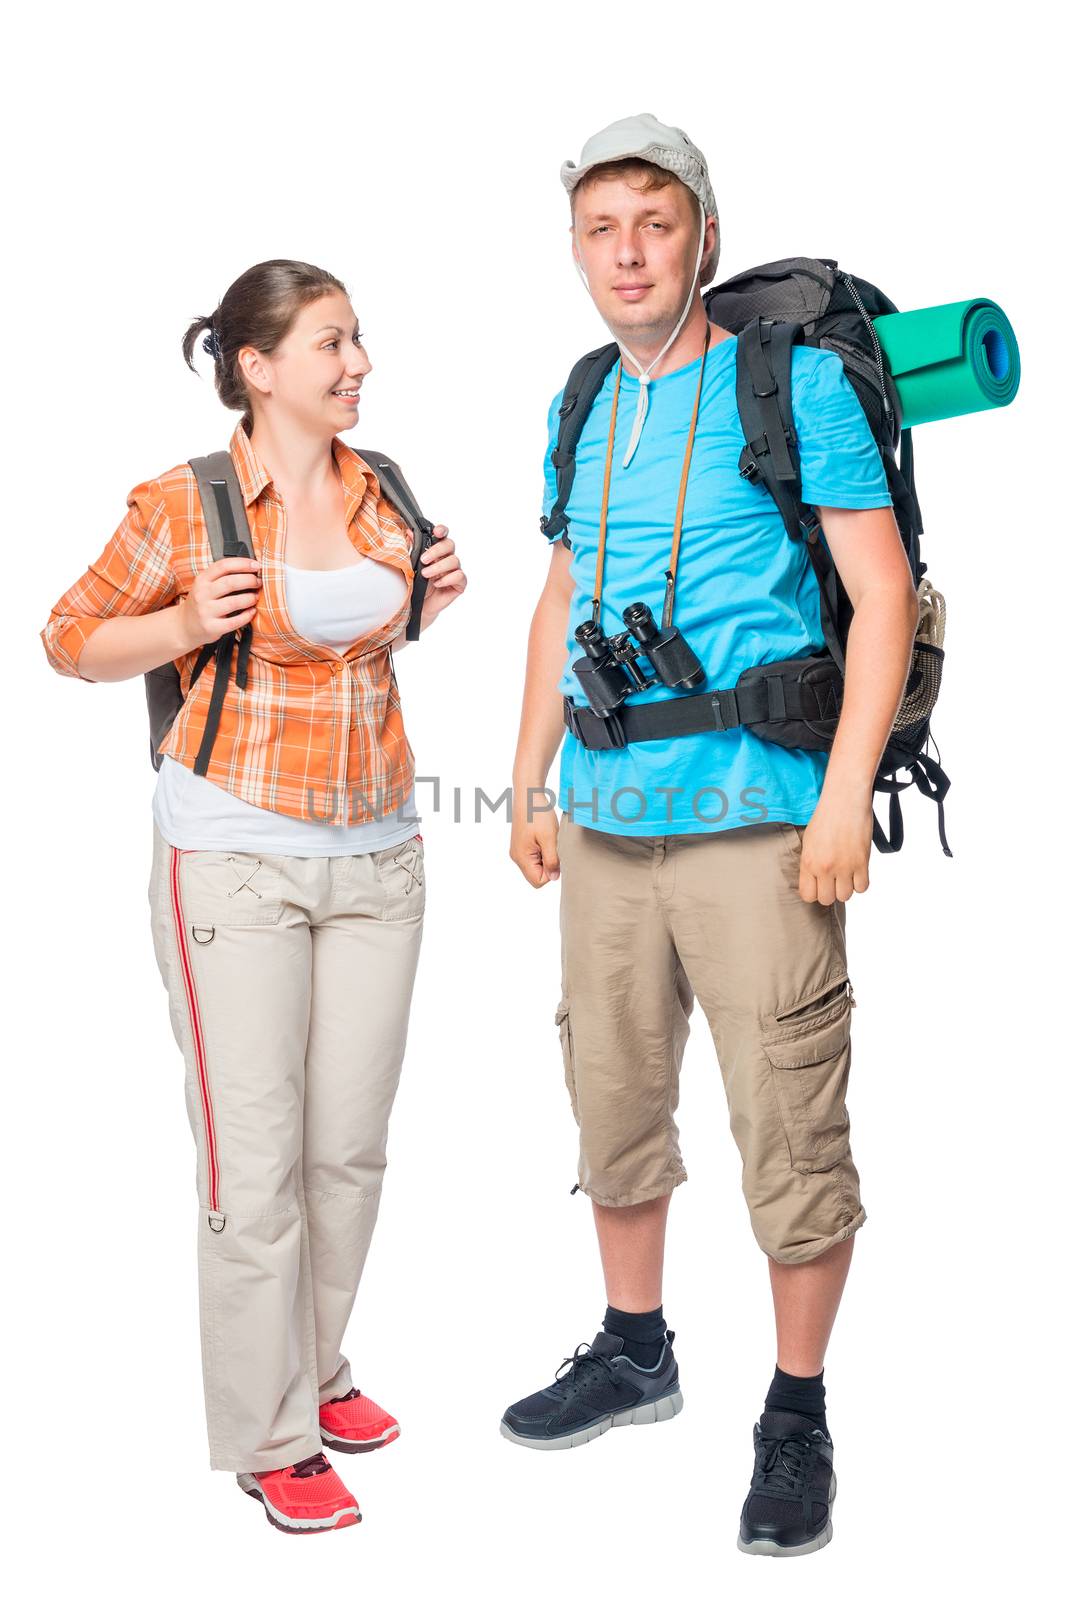 Girl and her friend with backpacks in the campaign on a white background